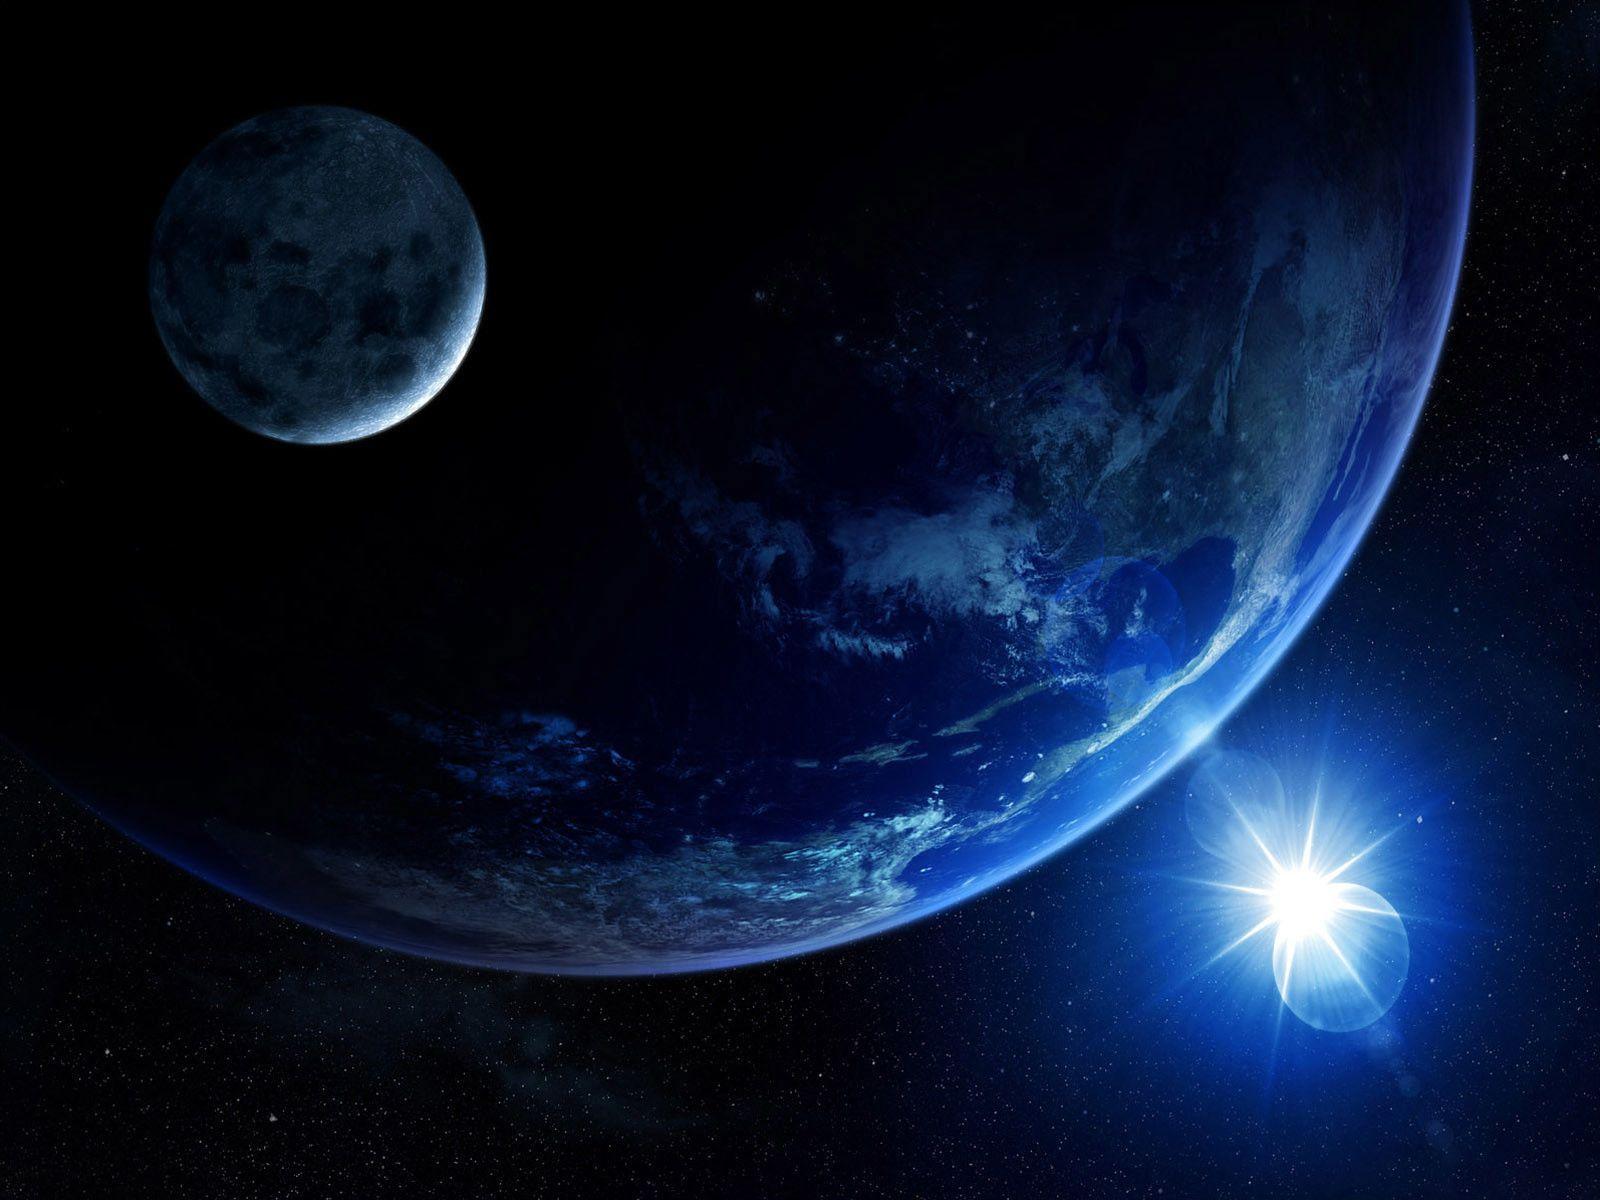 cool planet earth backgrounds